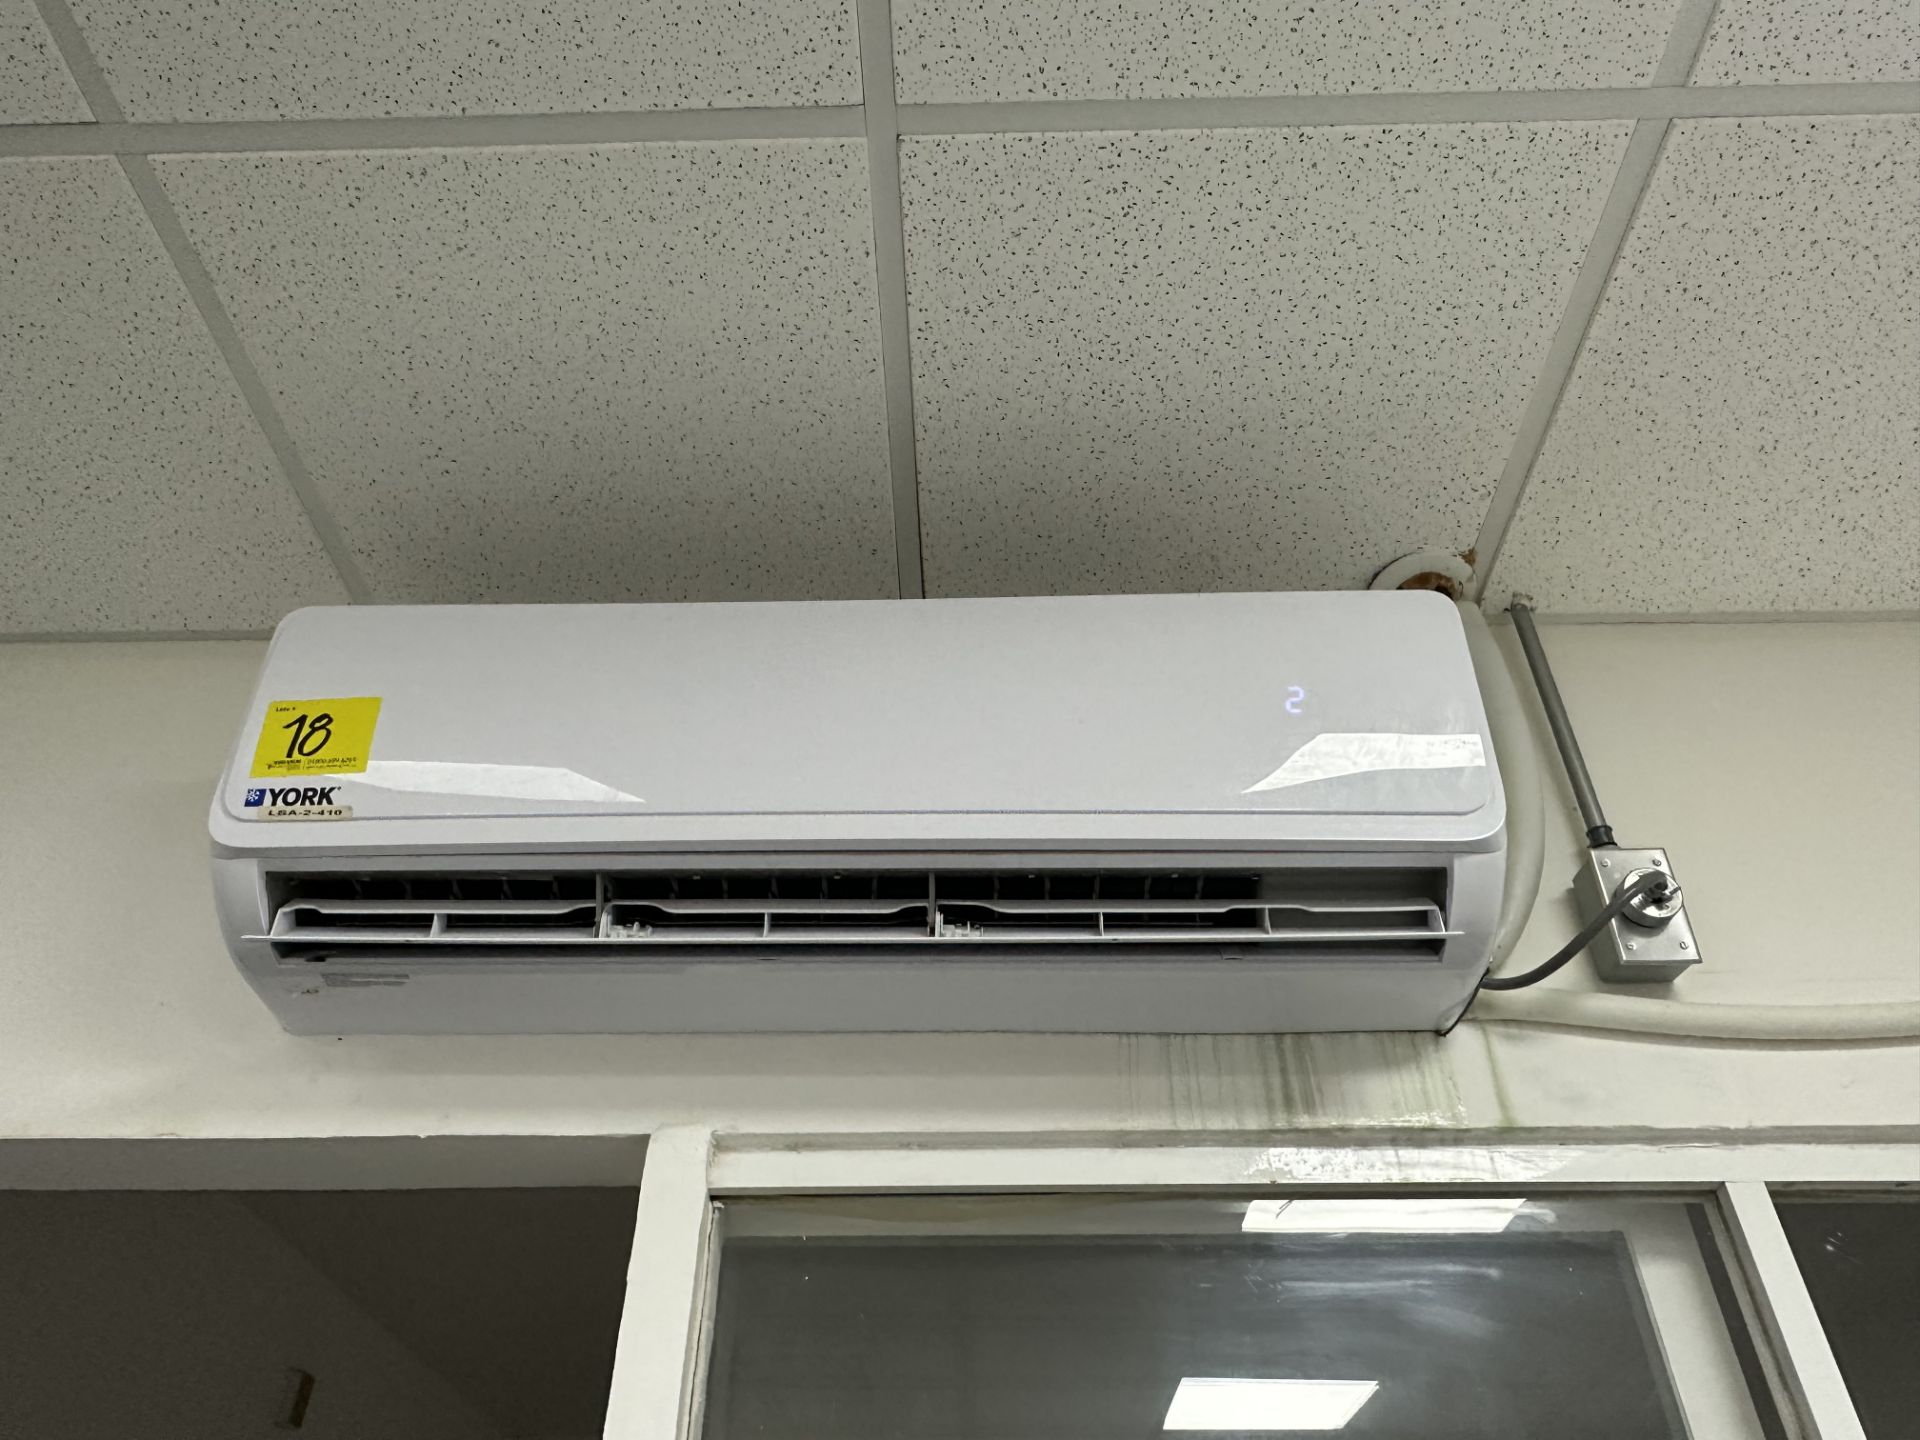 Lot of 3 minisplit air conditioners: 1 Carrier Air Conditioner, Model ND, ND Series, includes conde - Image 6 of 15